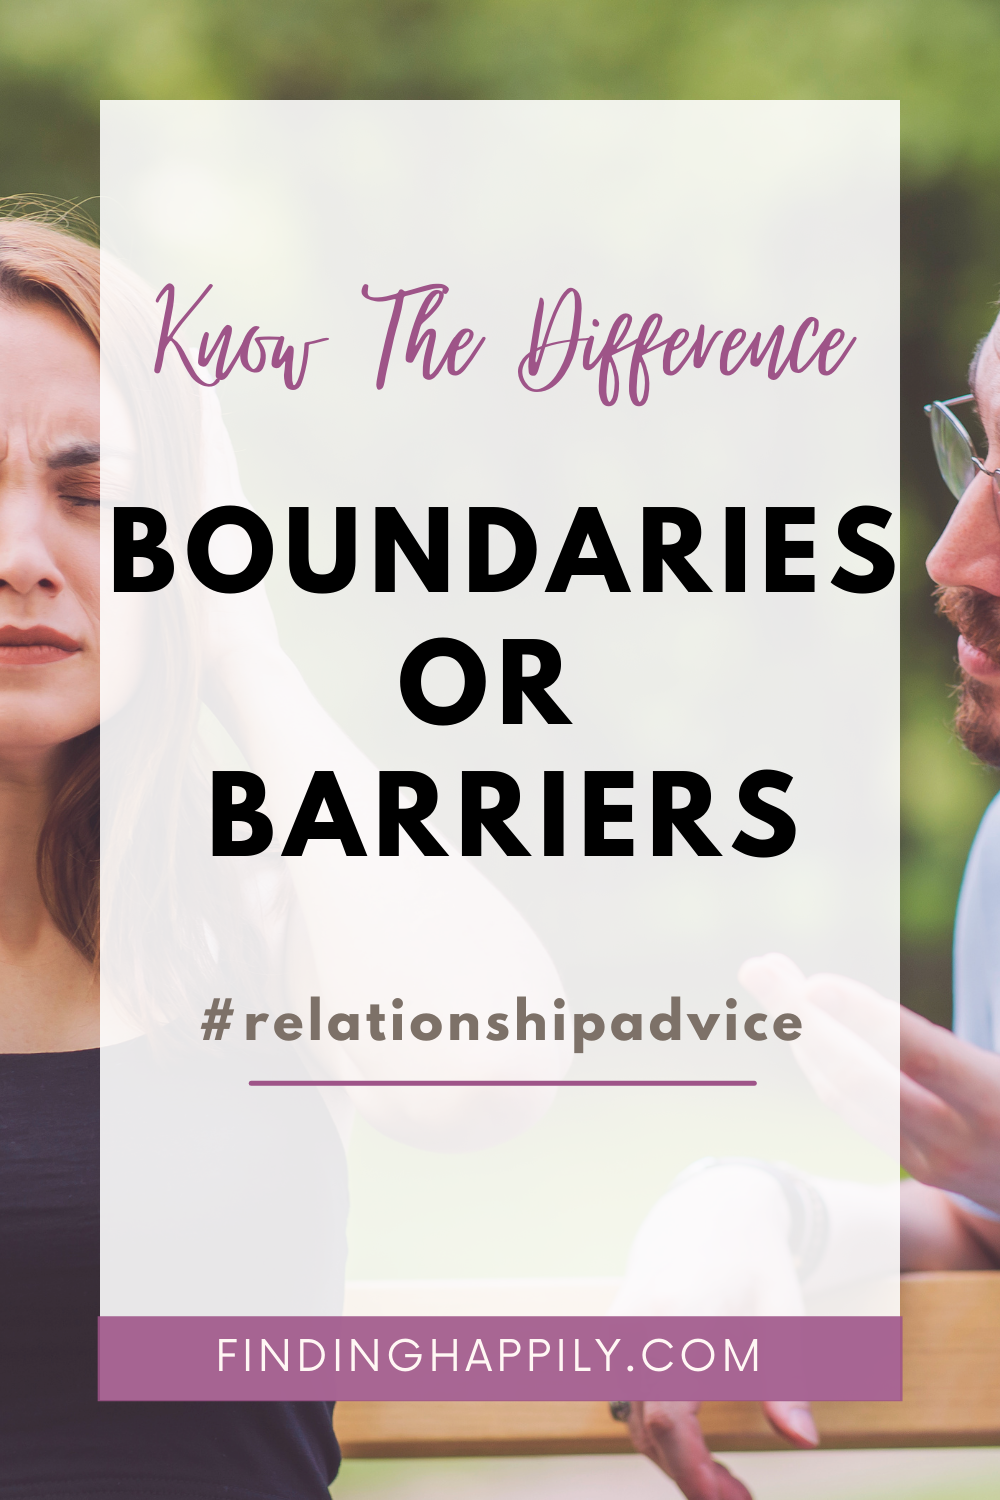 An arguing couple + boundaries or barriers